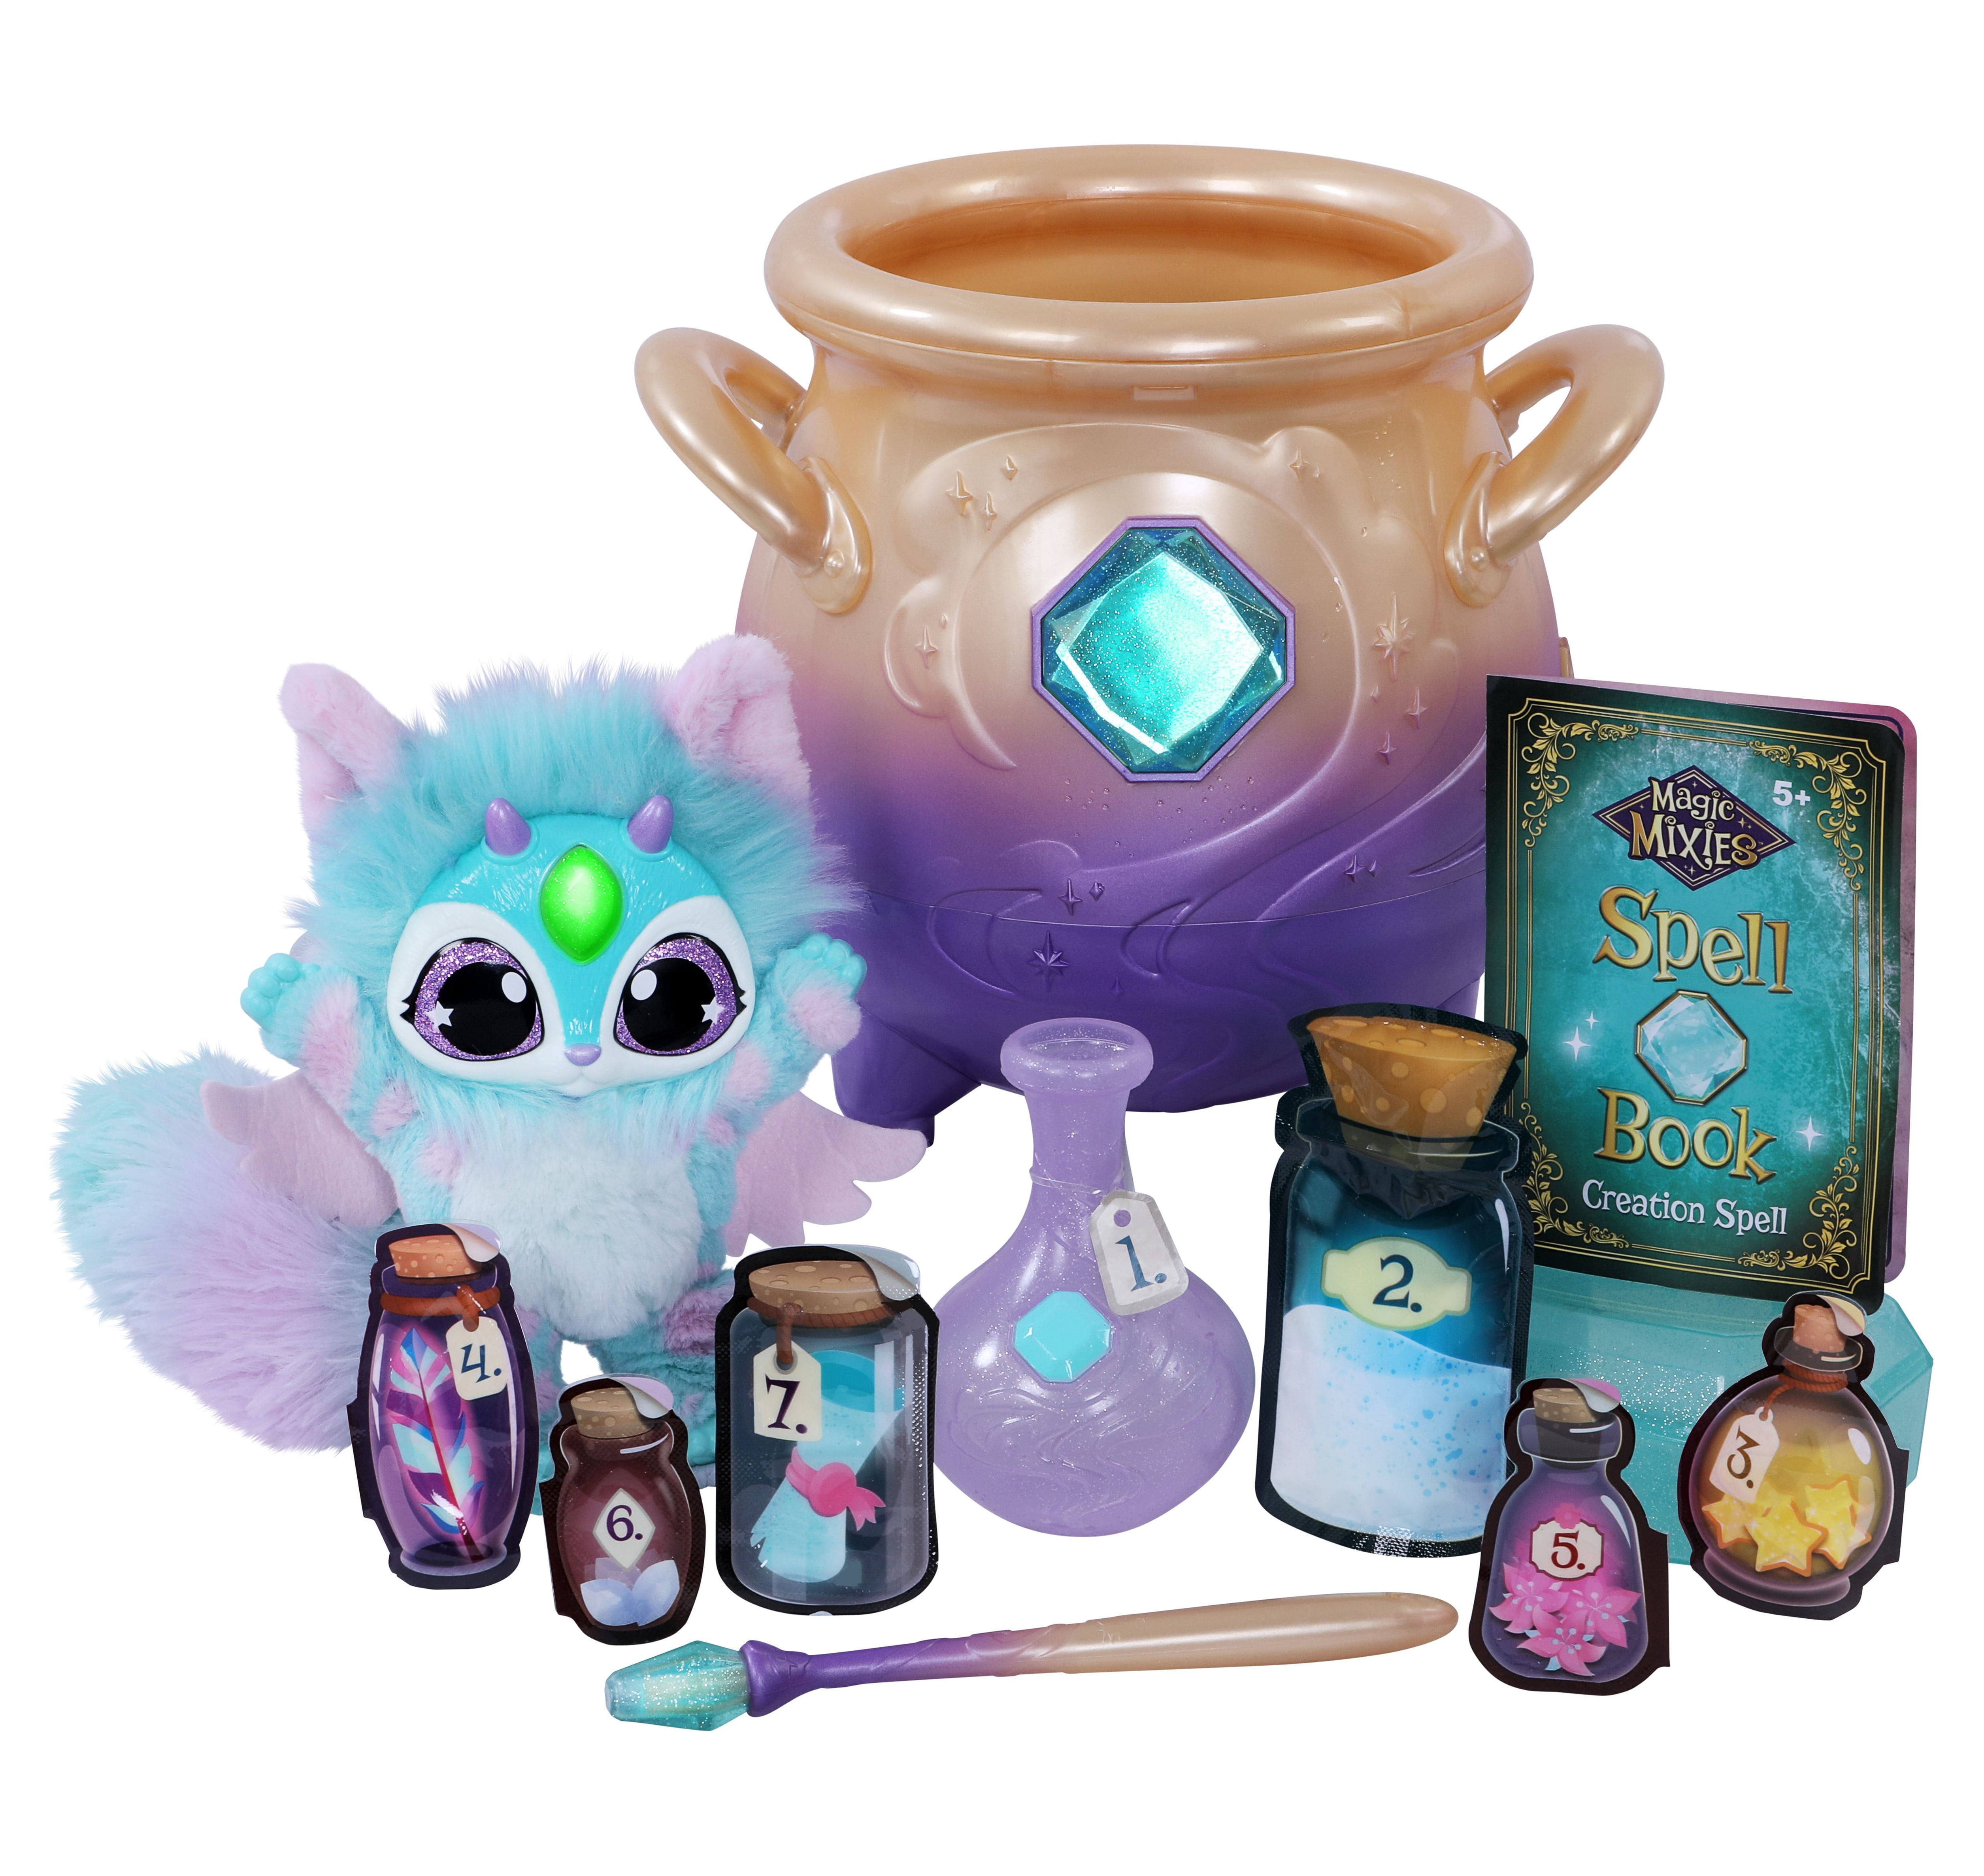 Magic Mixies Magical Misting Cauldron with Interactive inch Blue Plush  Toy and 50+ Sounds and Reactions, Toys for Kids, Ages 5+